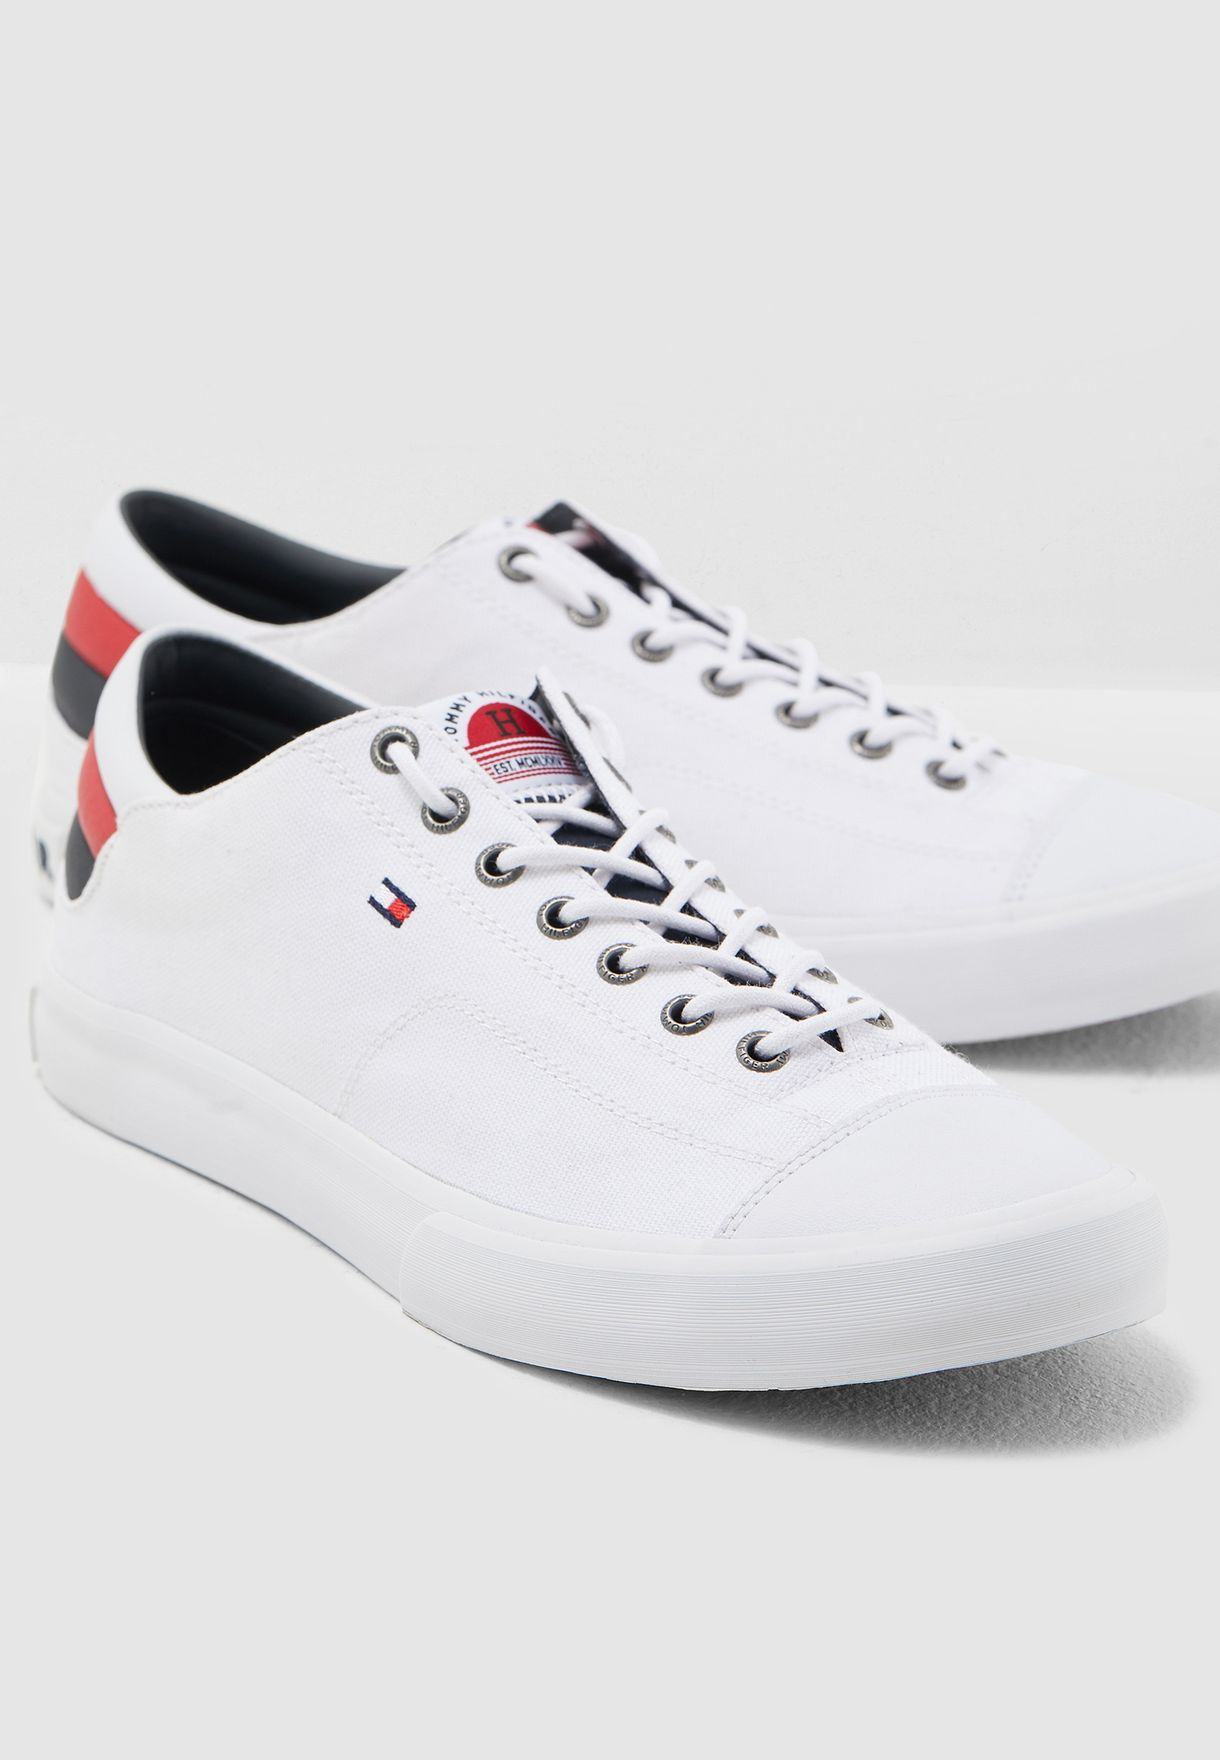 tommy hilfiger white sneakers mens